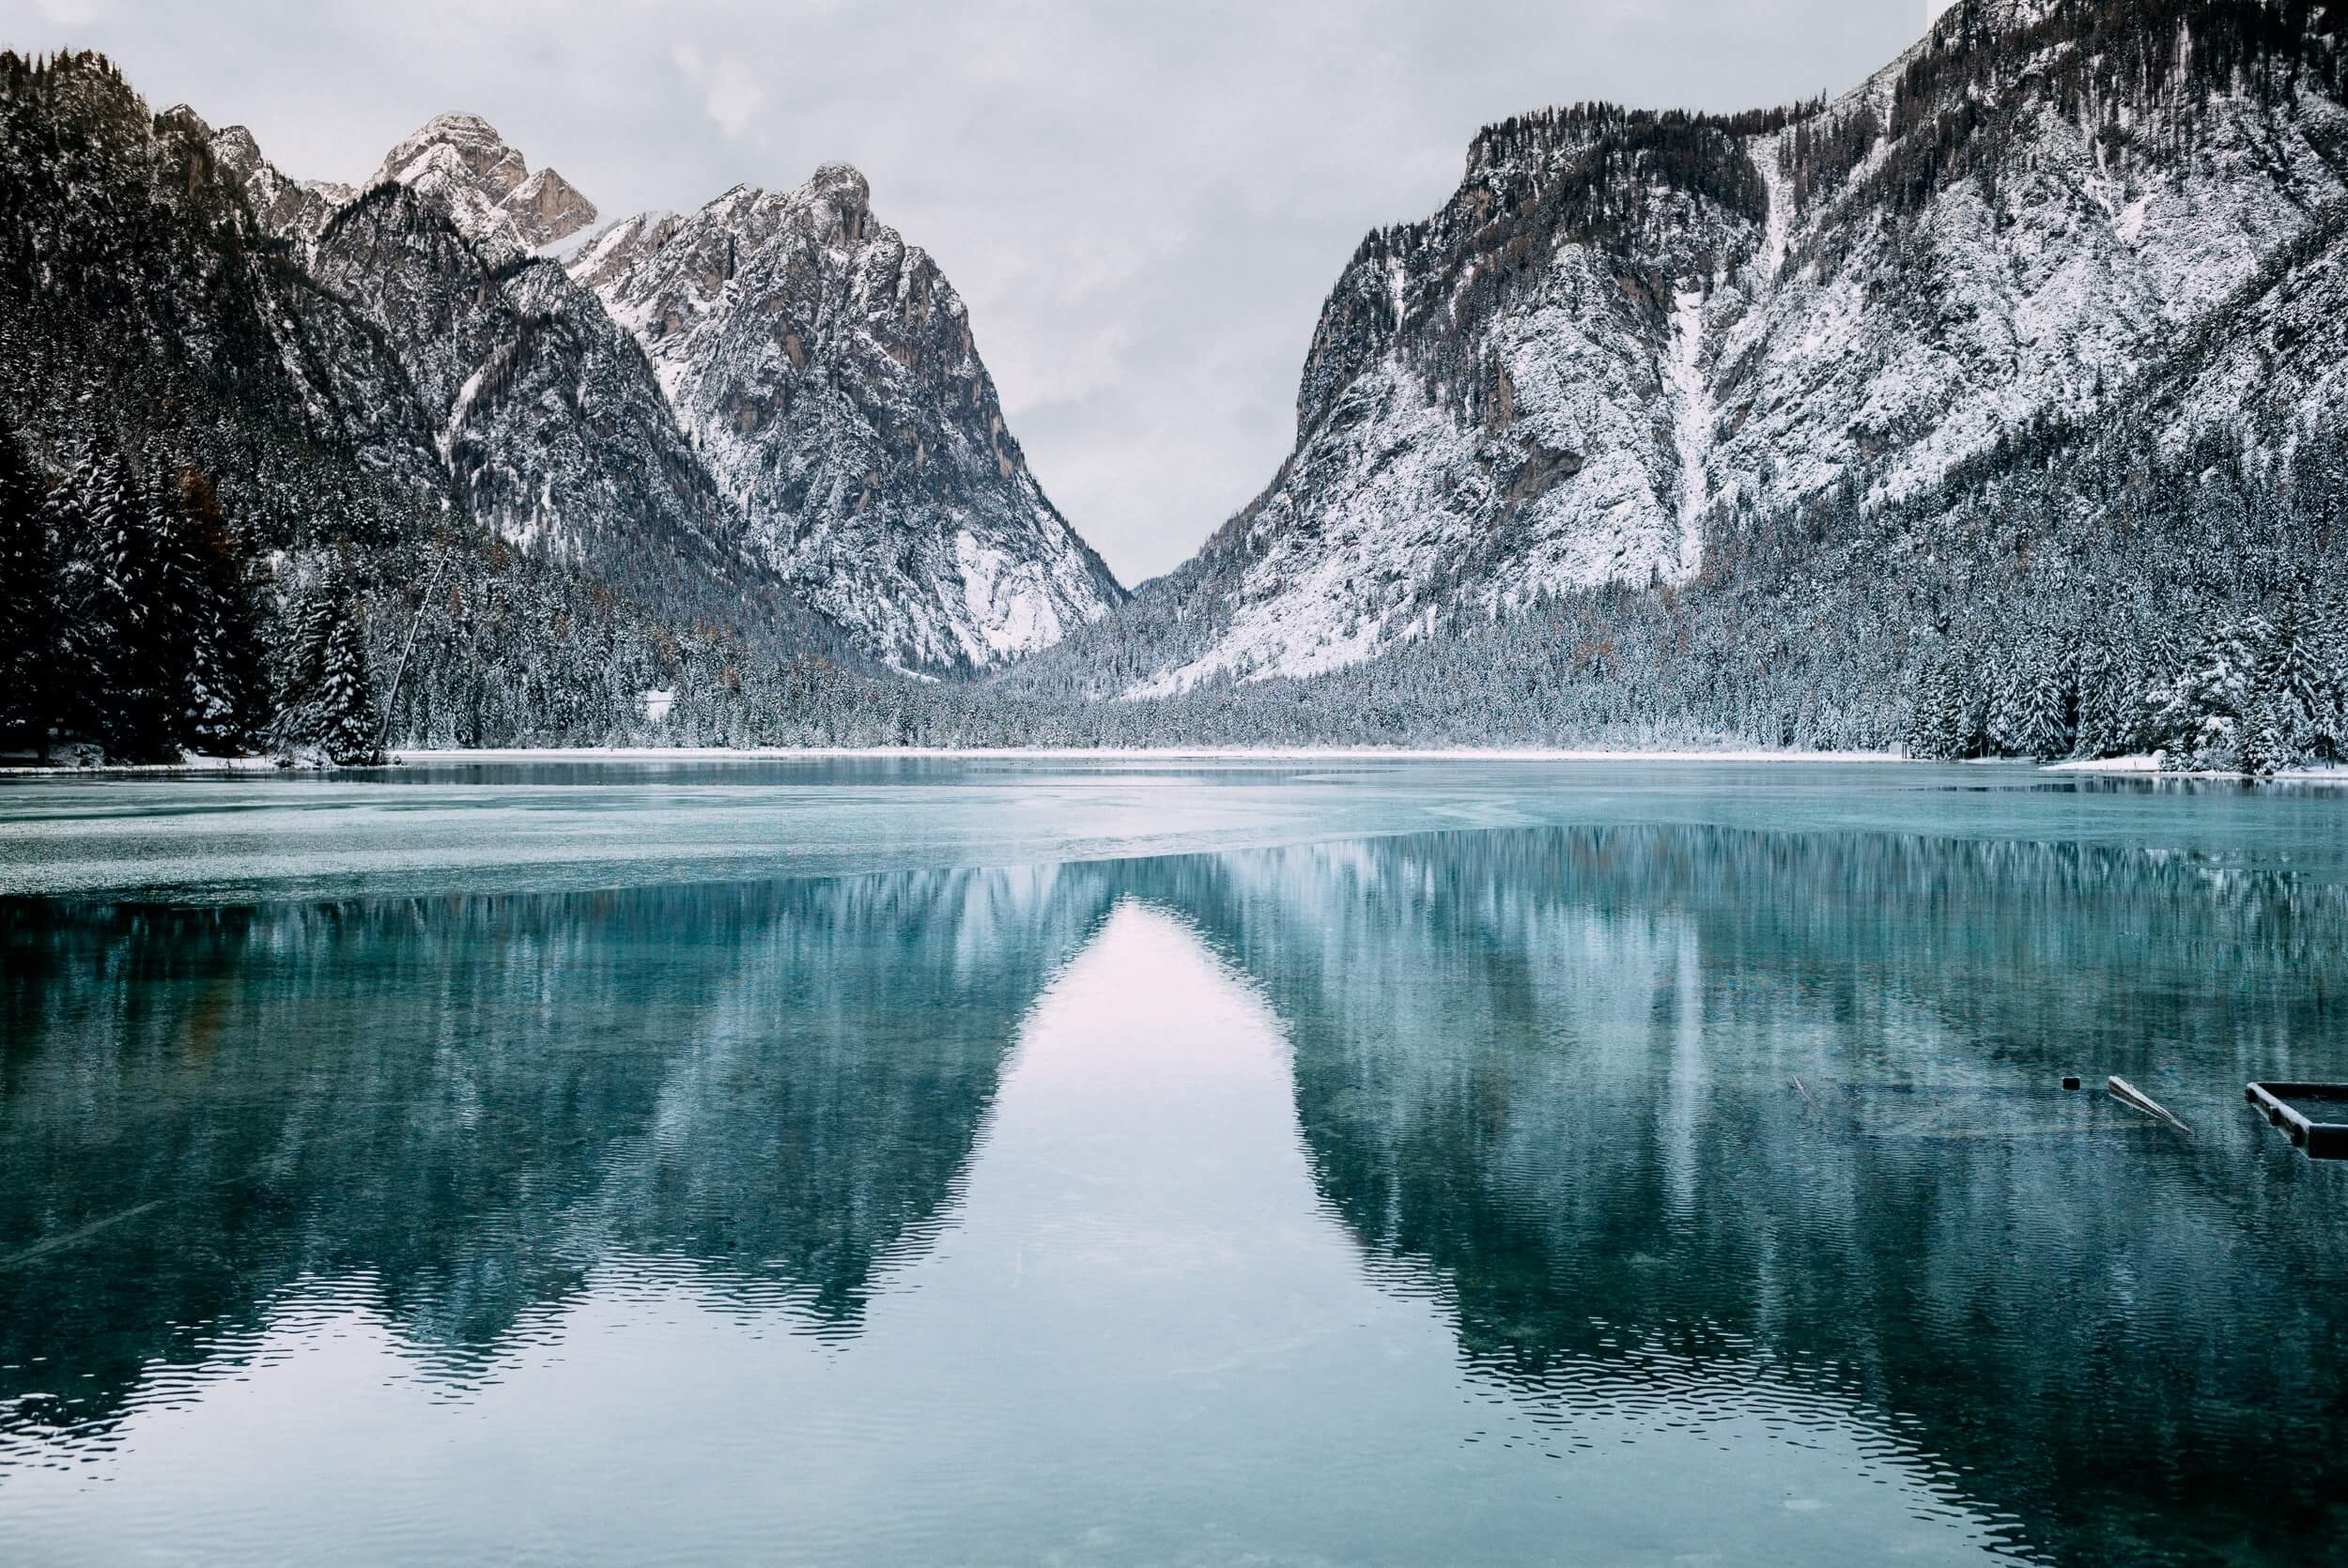 A lake surrounded by icy mountains.